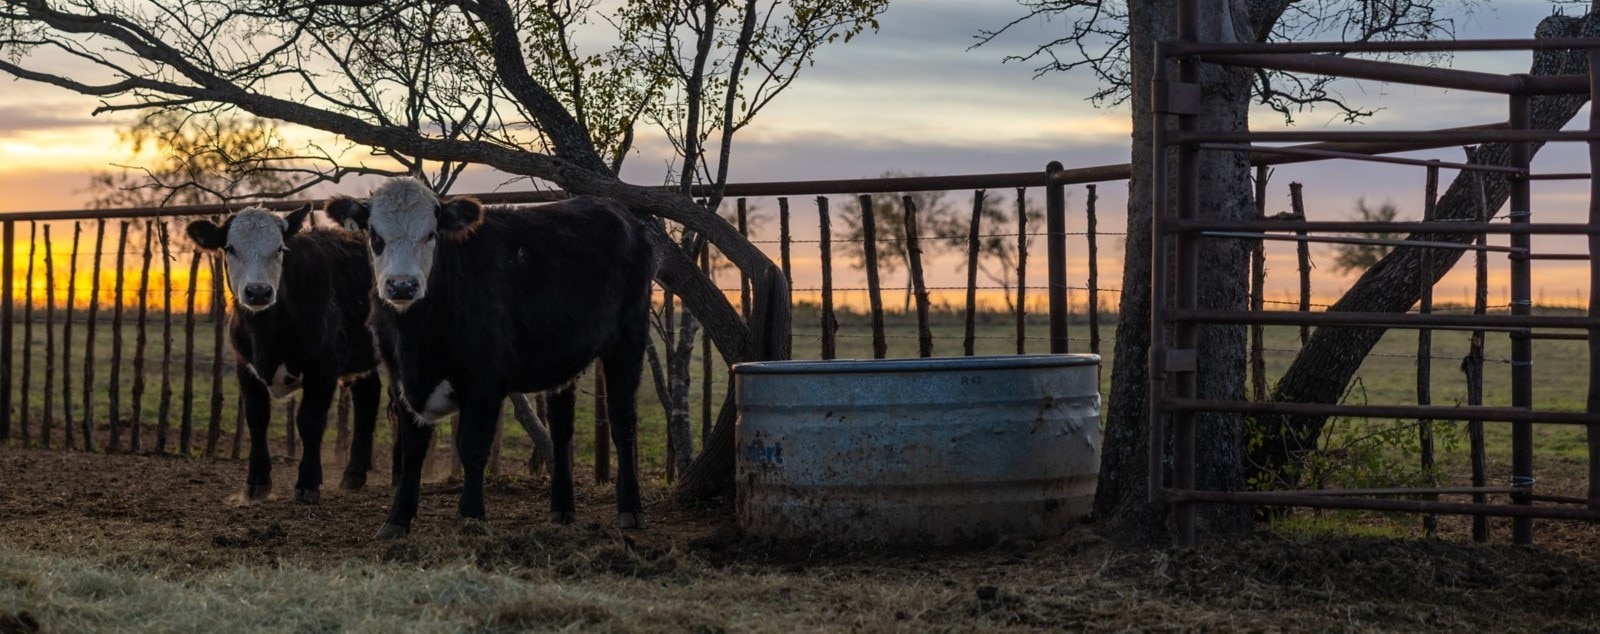 2 cows at the farm at sunset